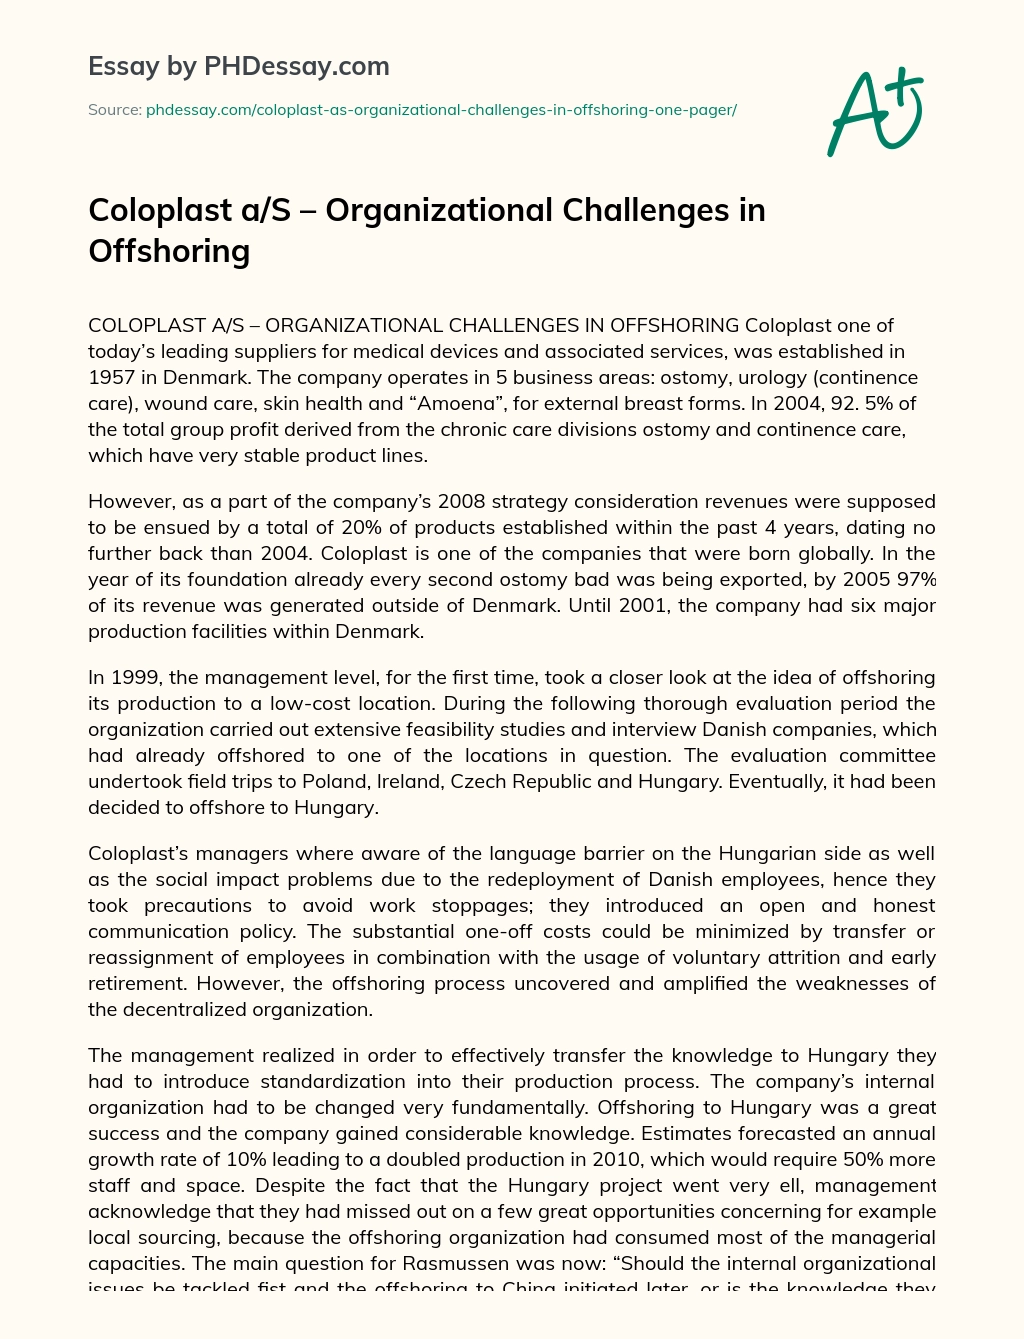 Coloplast a/S – Organizational Challenges in Offshoring essay